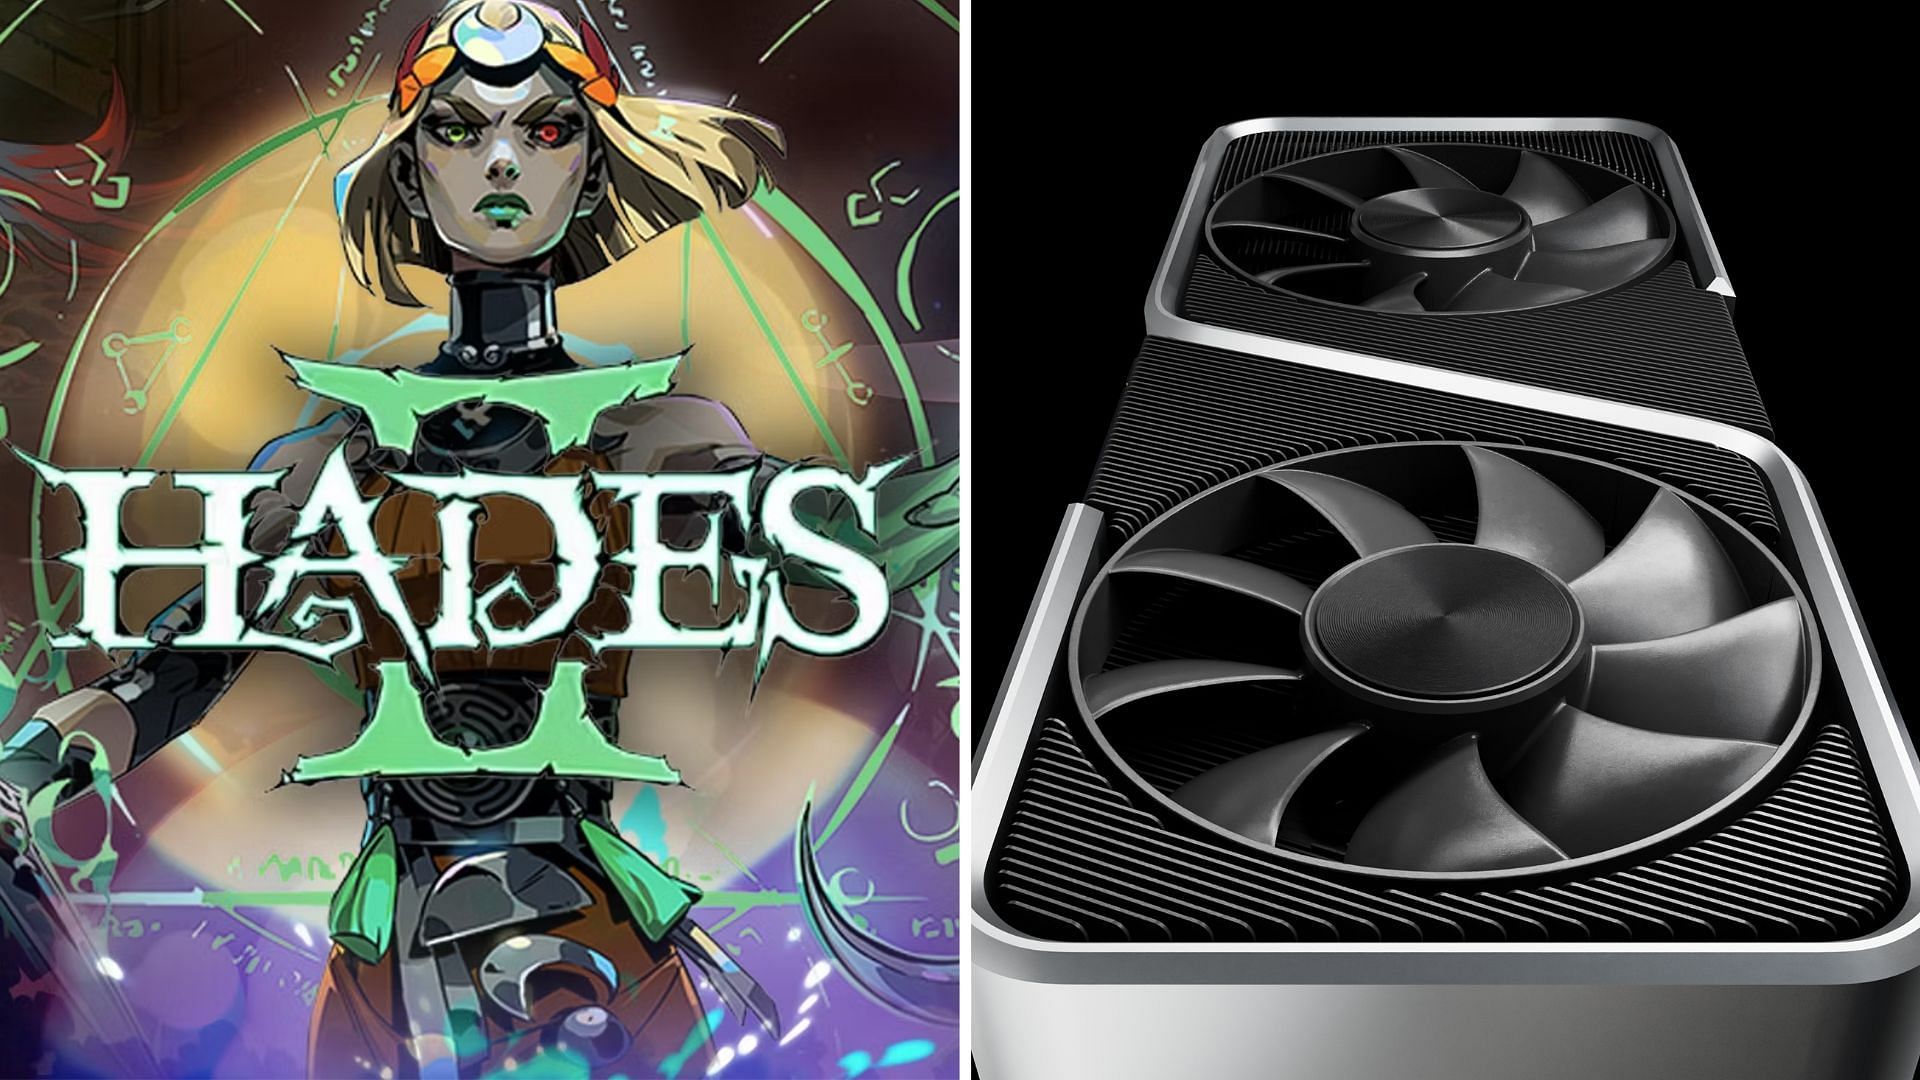 The RTX 3060 and 3060 Ti are capable graphics cards for Hades 2 (Image via Steam and Nvidia)